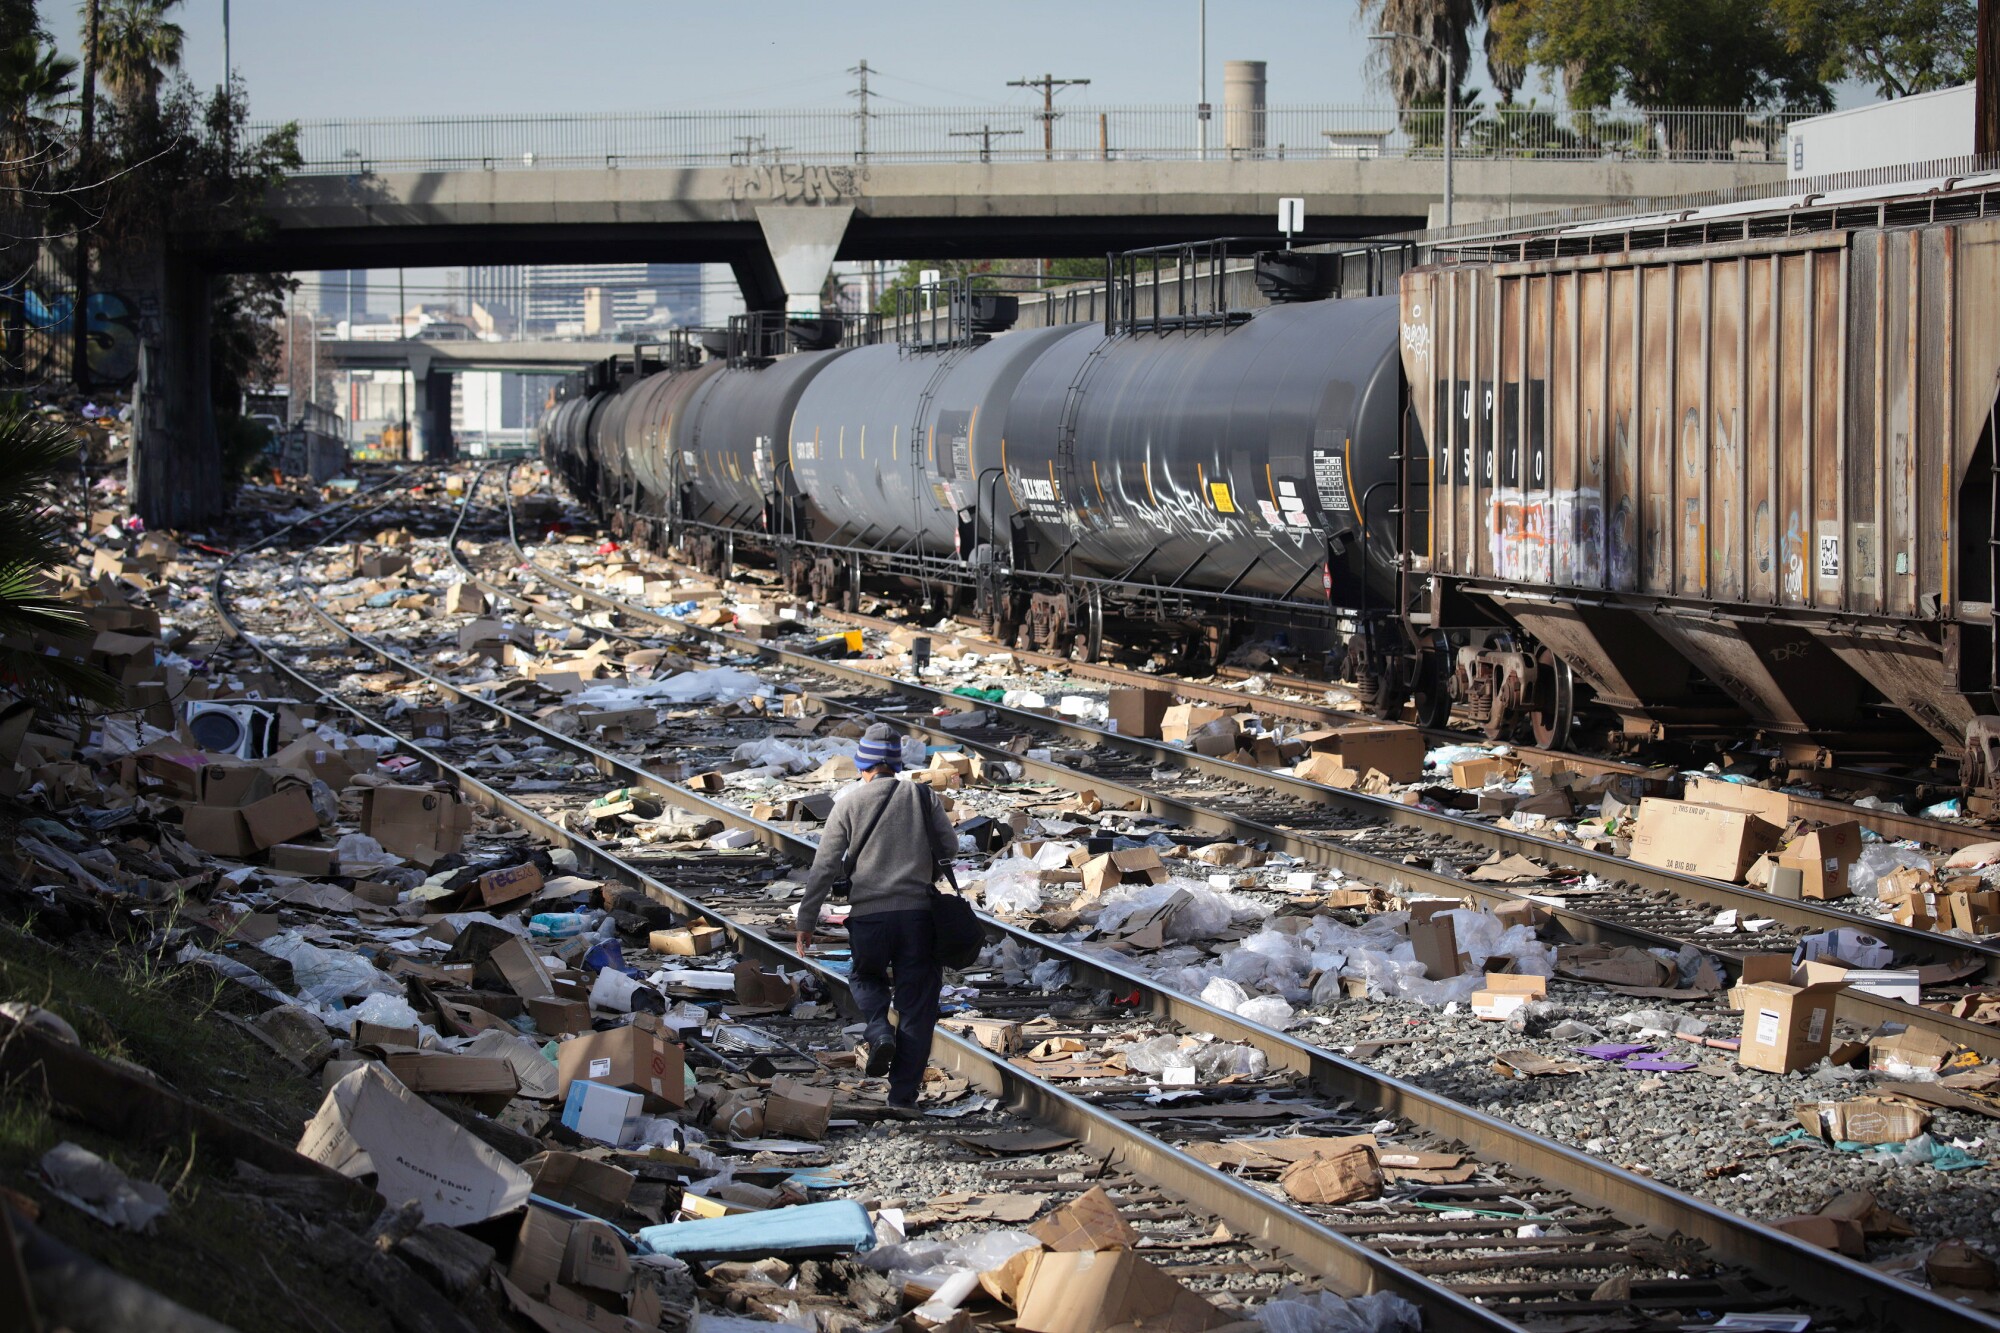 A man walks along the Union Pacific railway line in Los Angeles